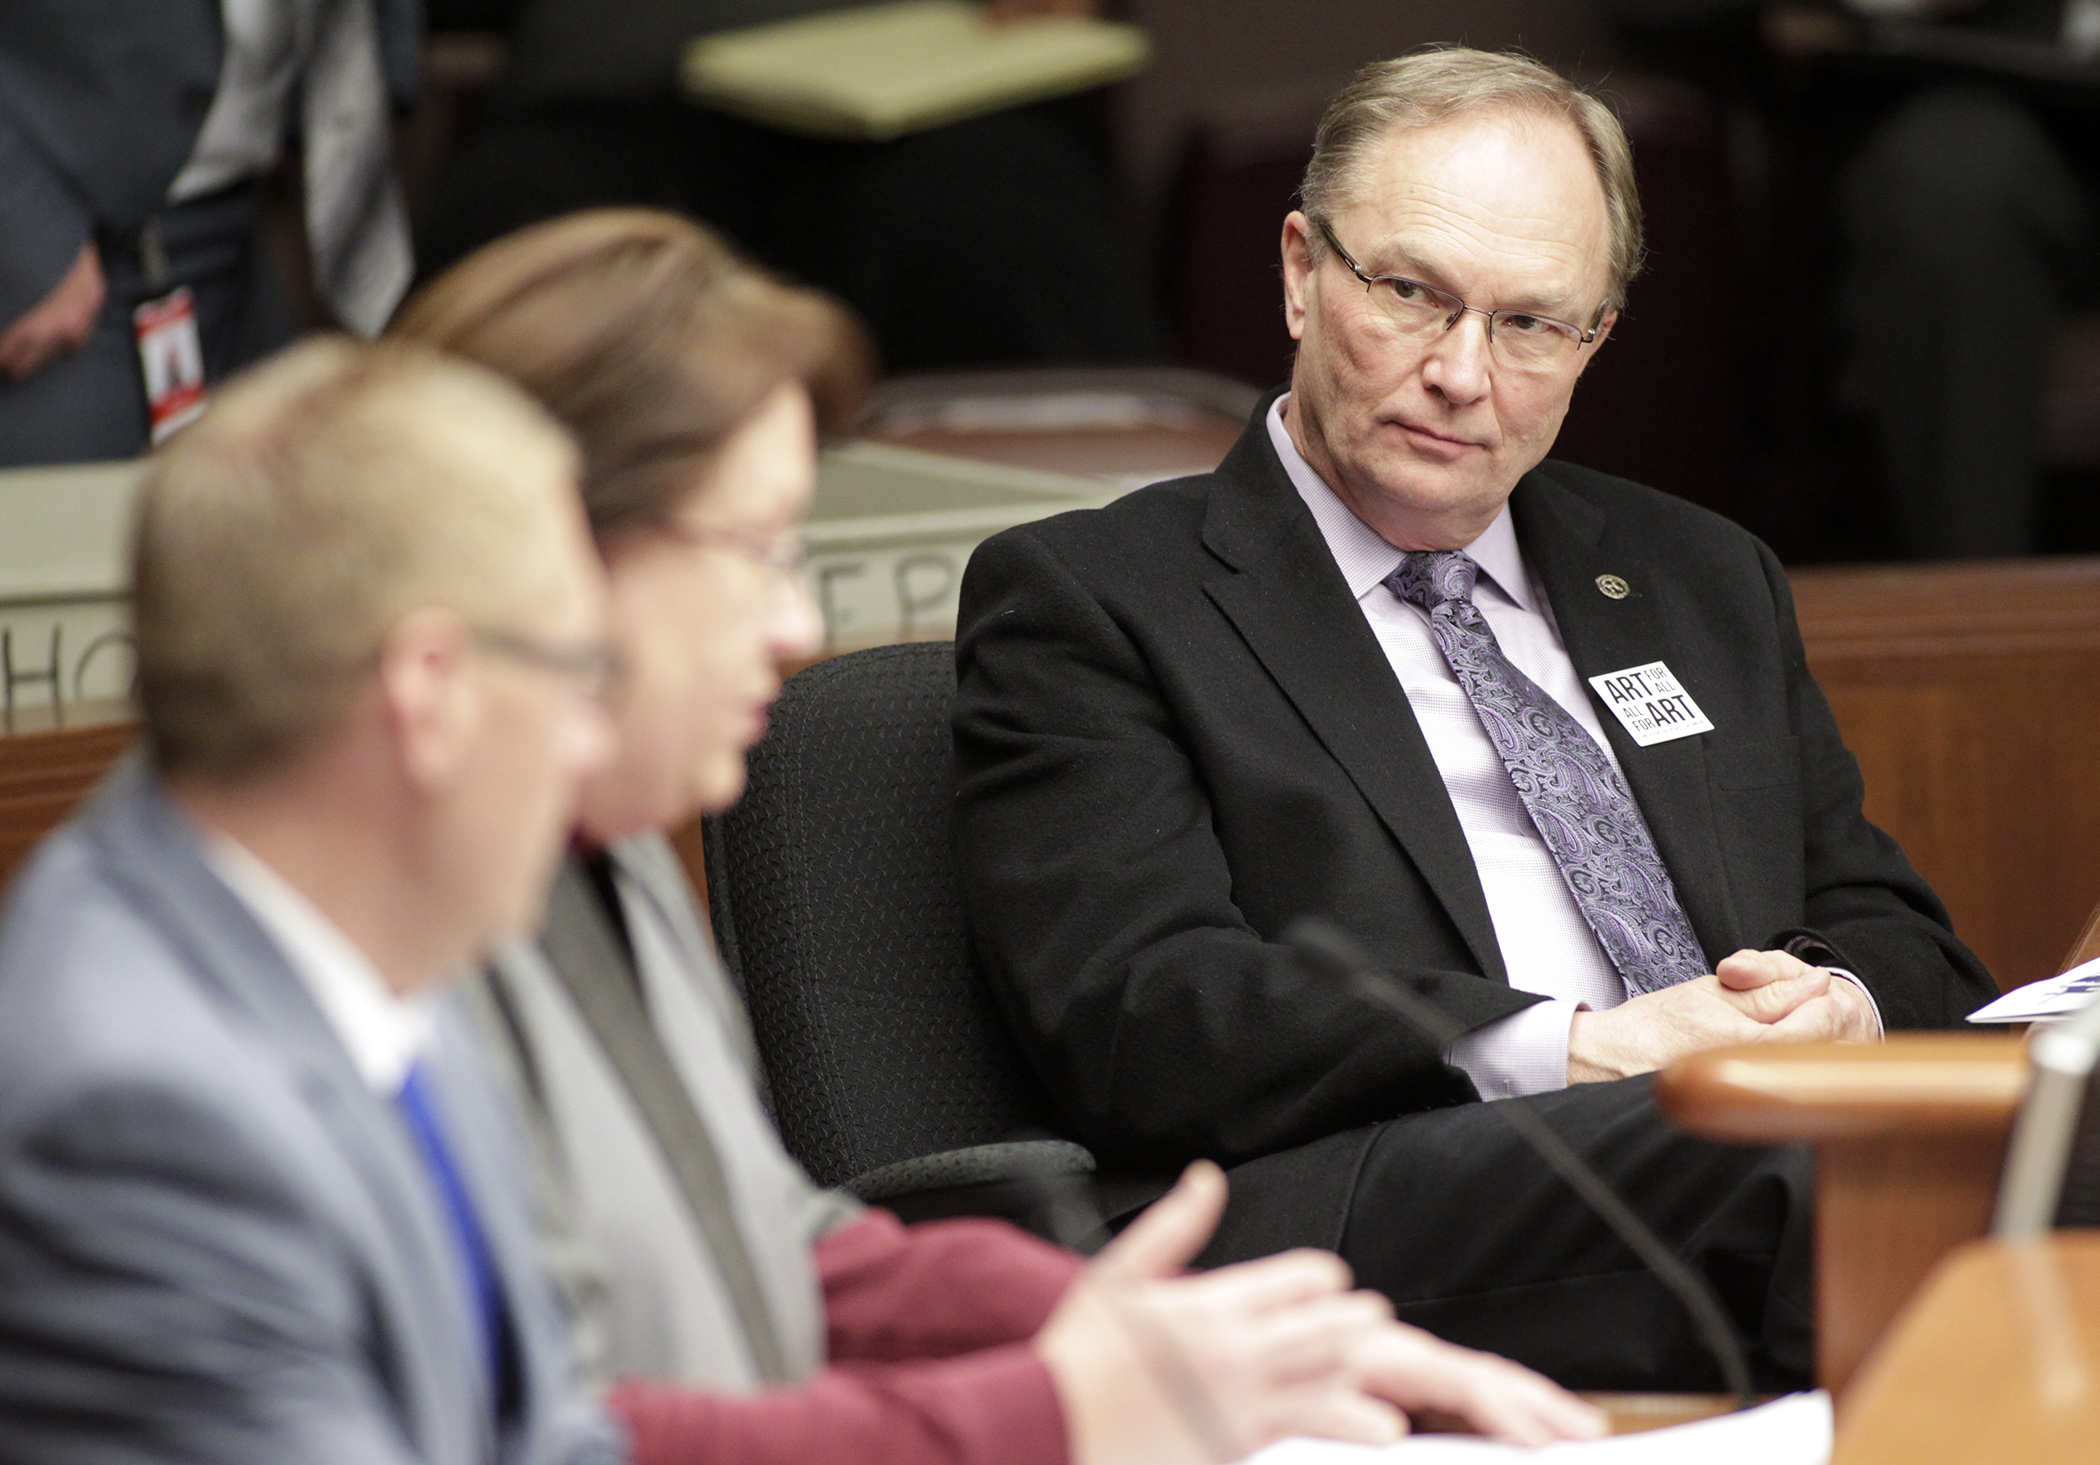 Rep. Paul Torkelson, right, listens during testimony on HF1617, during the House Transportation Finance Committee Feb. 28. He sponsors the bill that would cap bridge project grants under the Local Bridge Replacement and Rehabilitation program at $7 million. Photo by Paul Battaglia